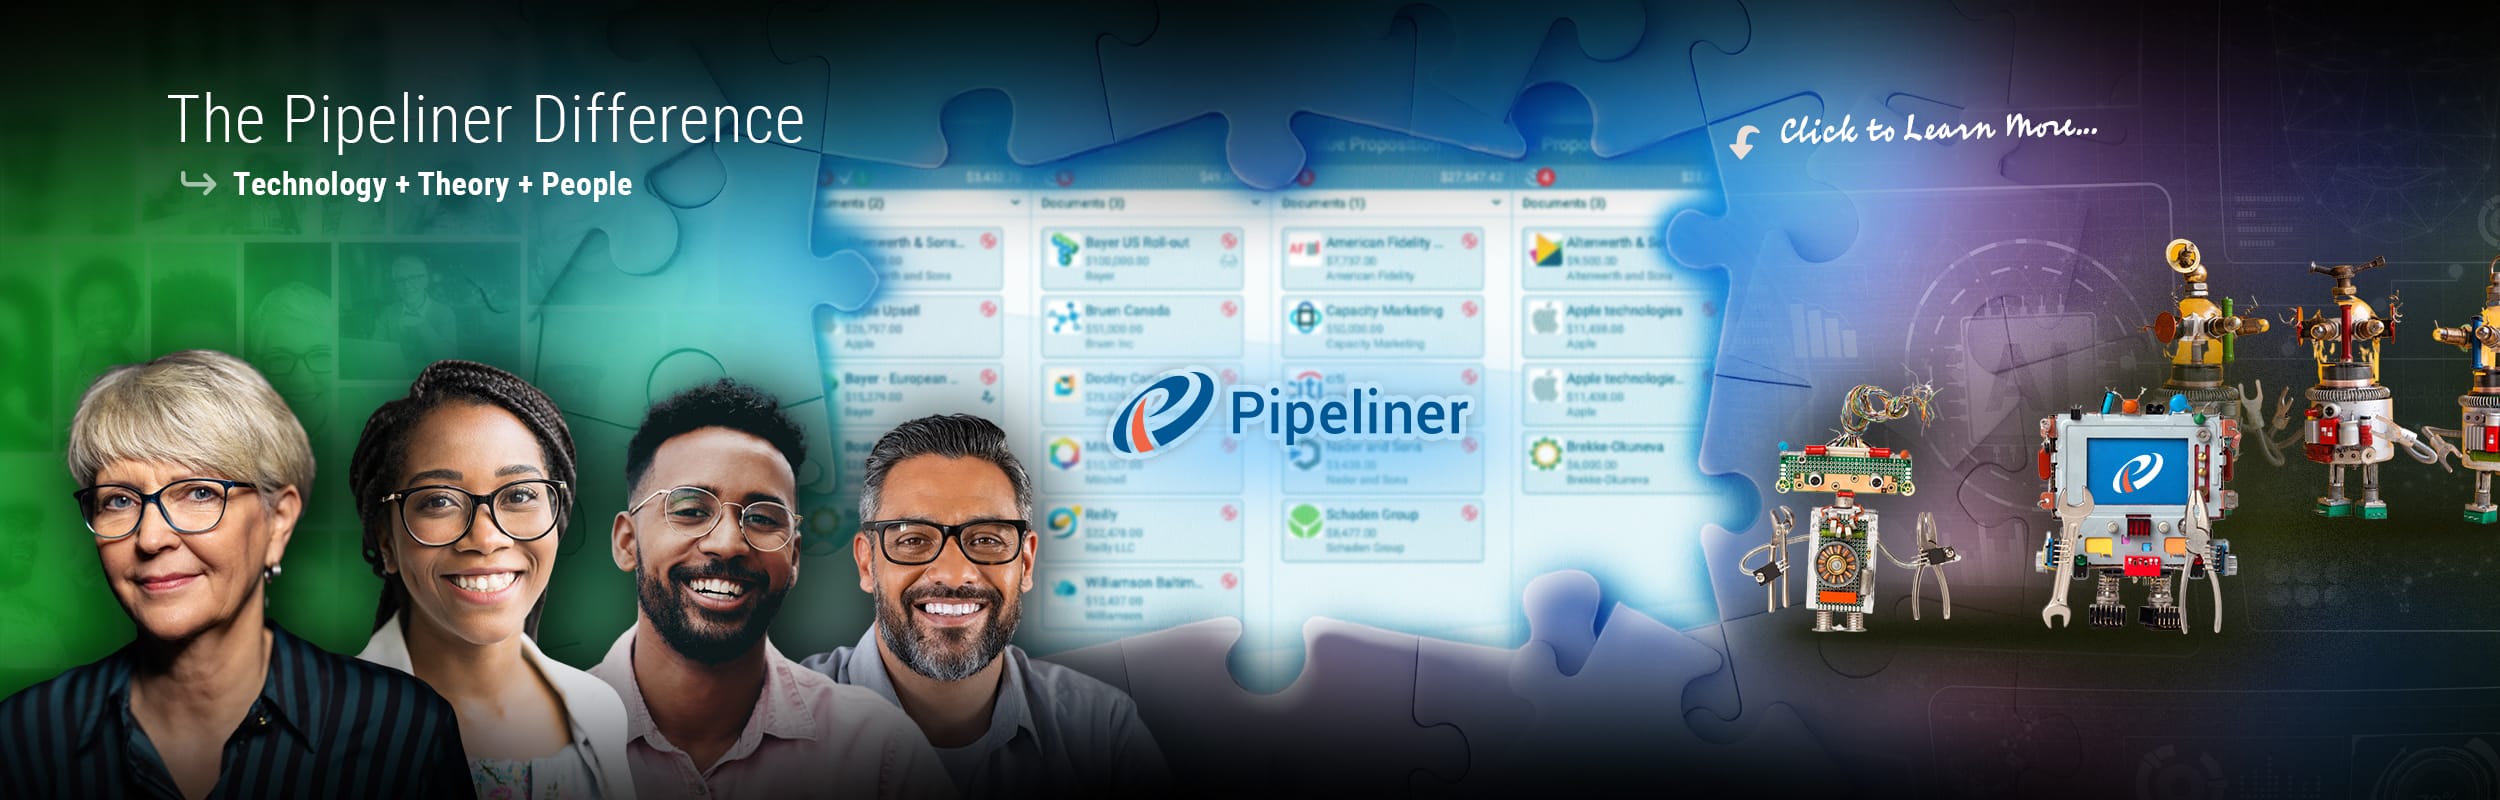 The Pipeliner CRM Difference